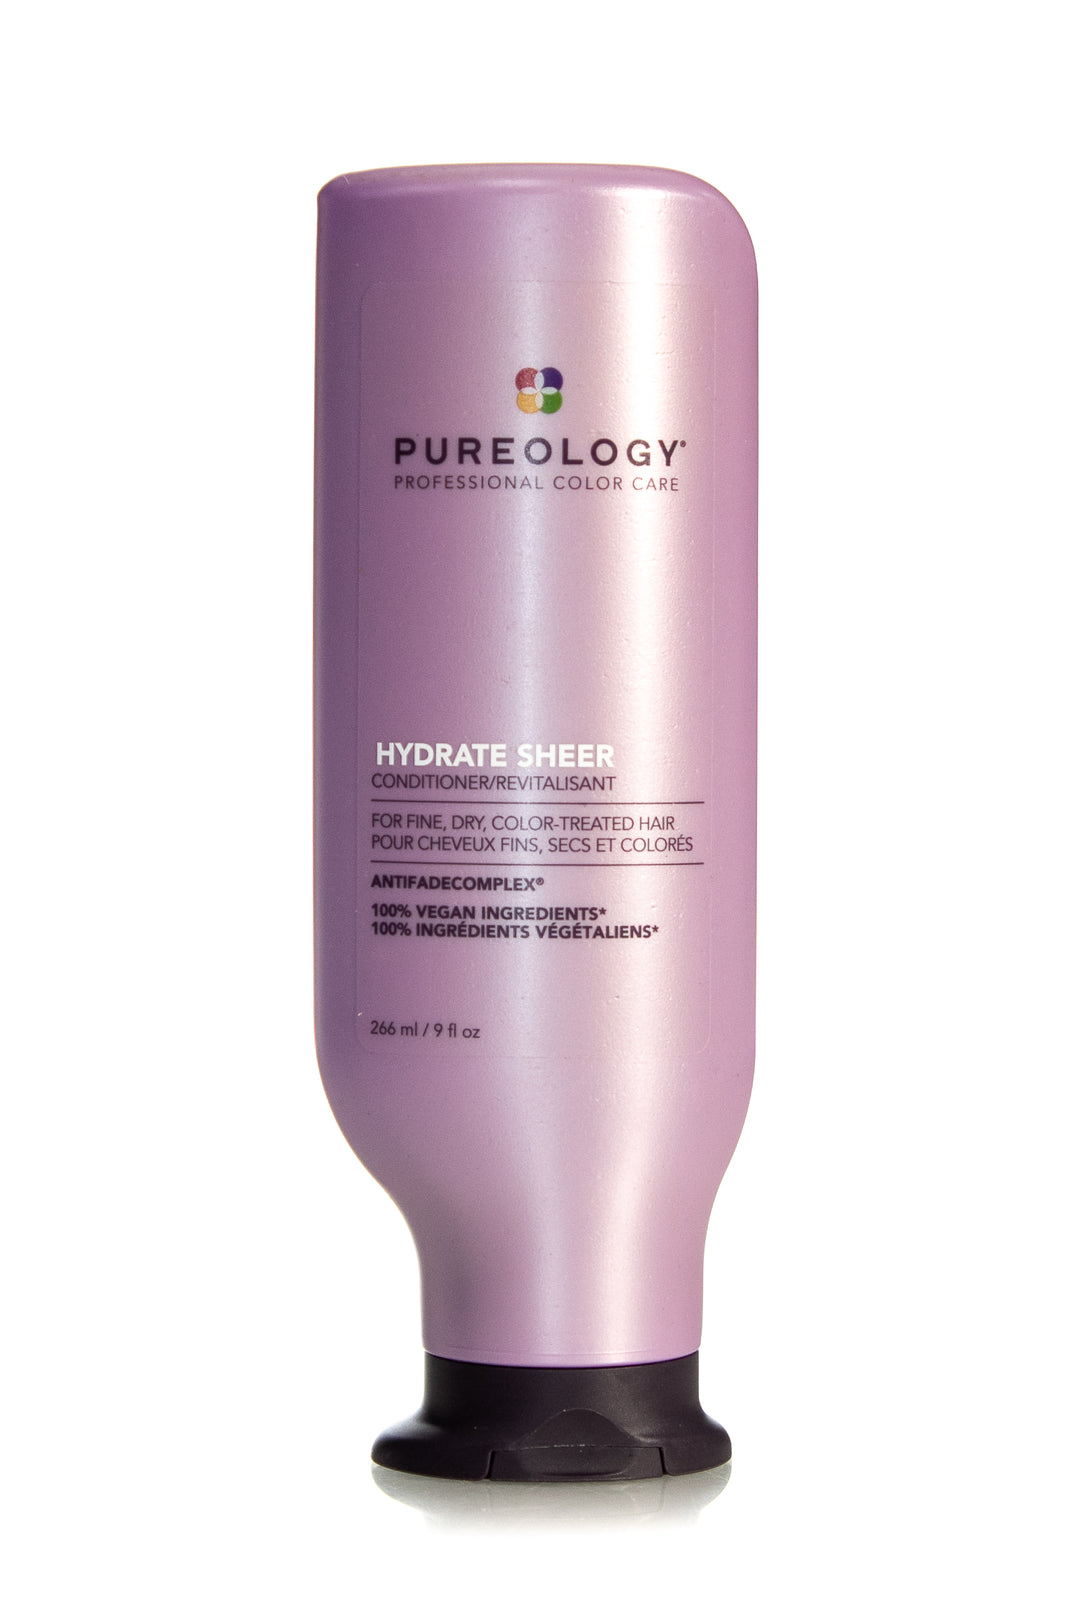 PUREOLOGY Hydrate Sheer Conditioner | 266ml